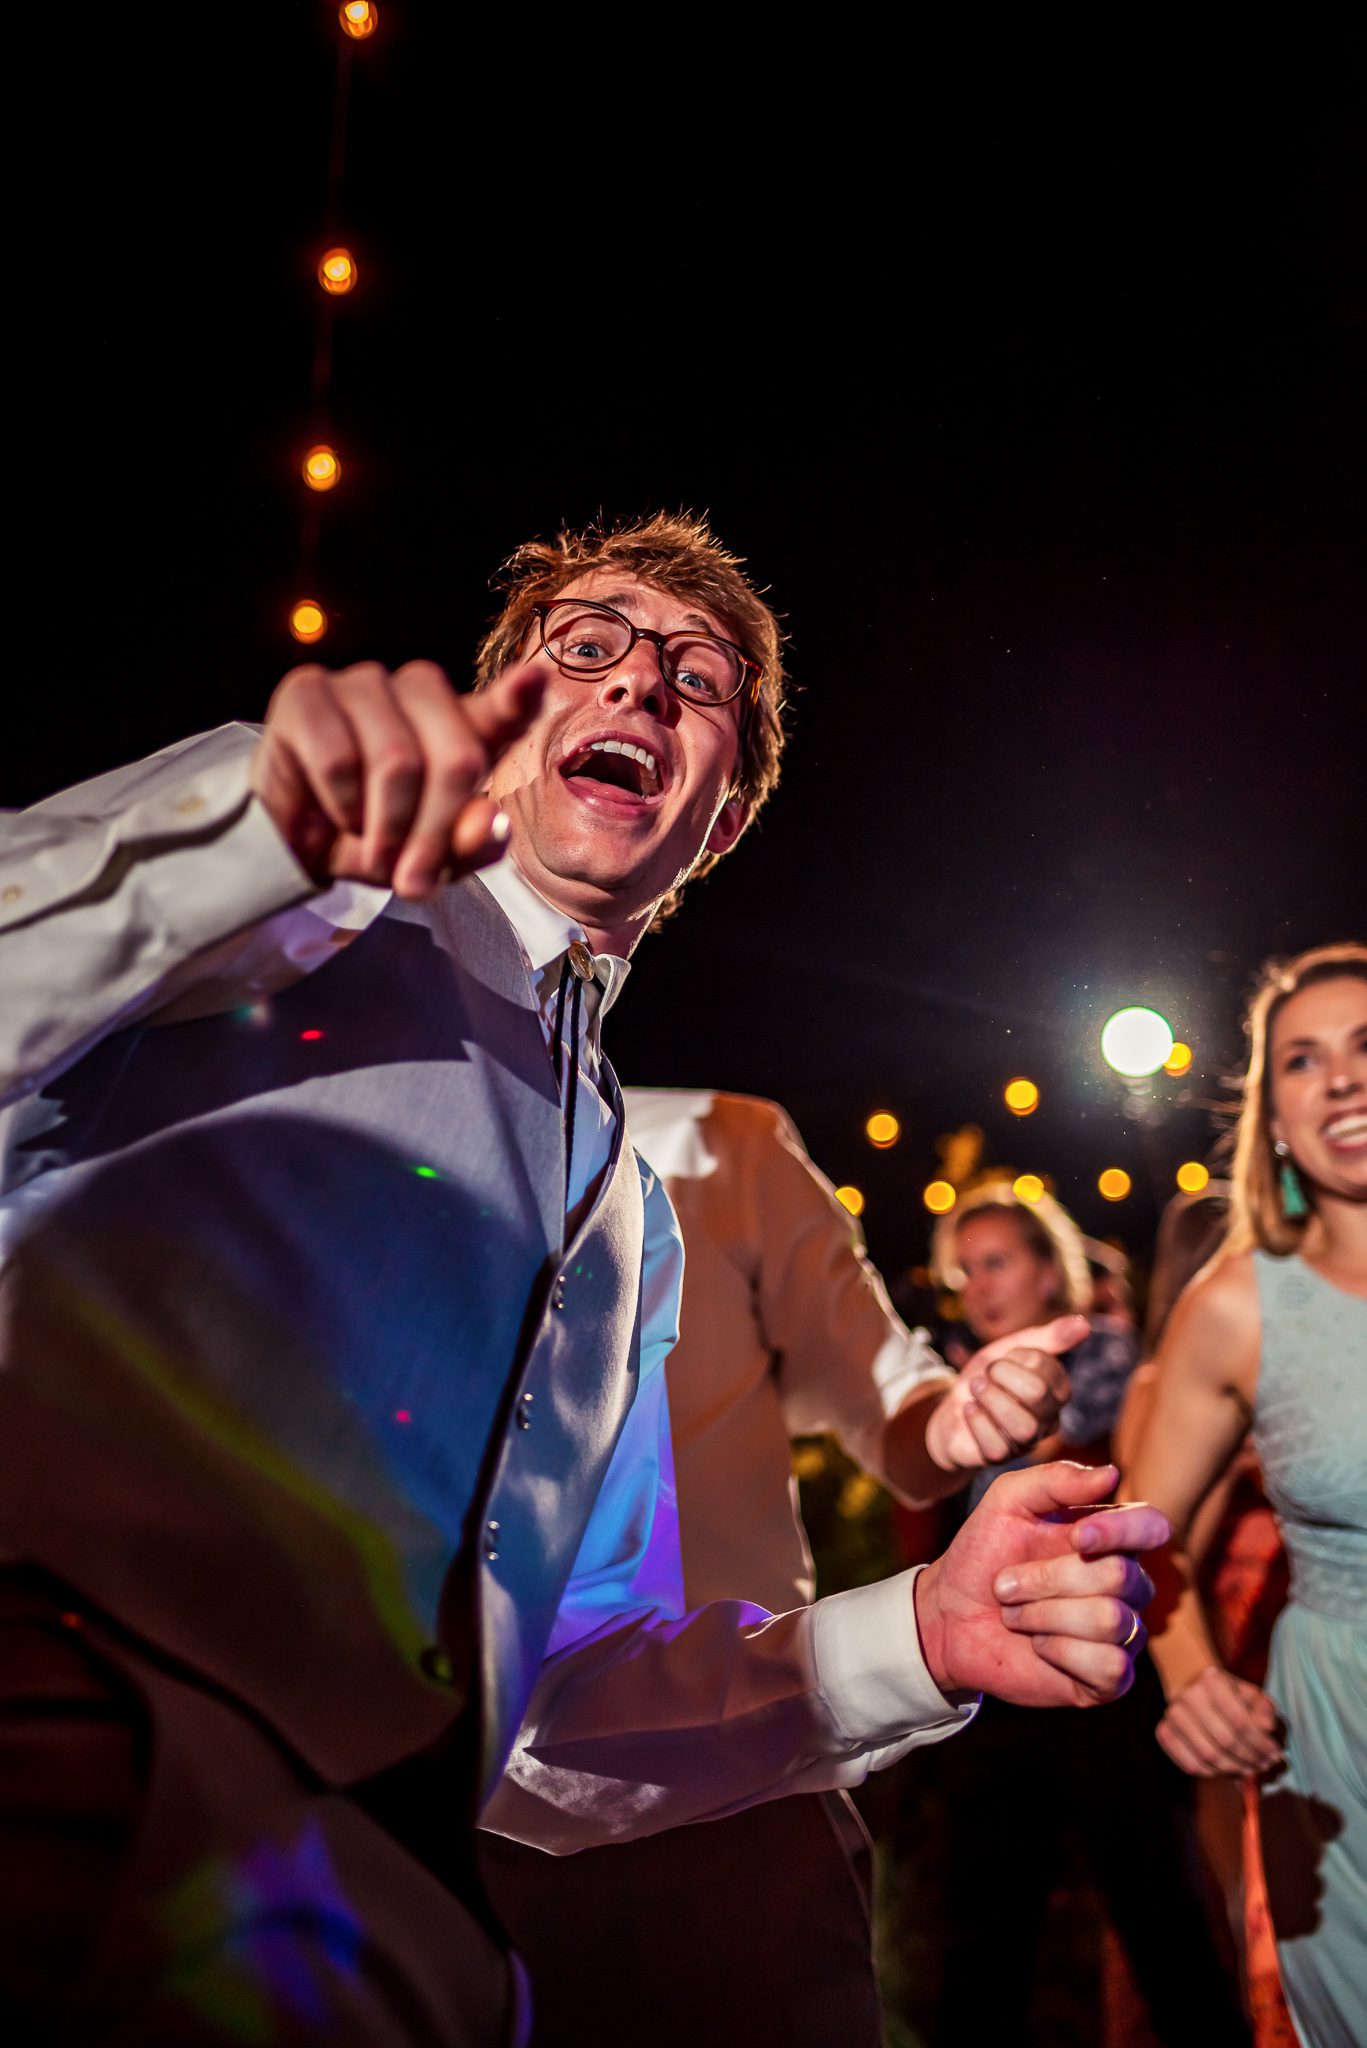 A man points into the camera as he dances during a wedding reception